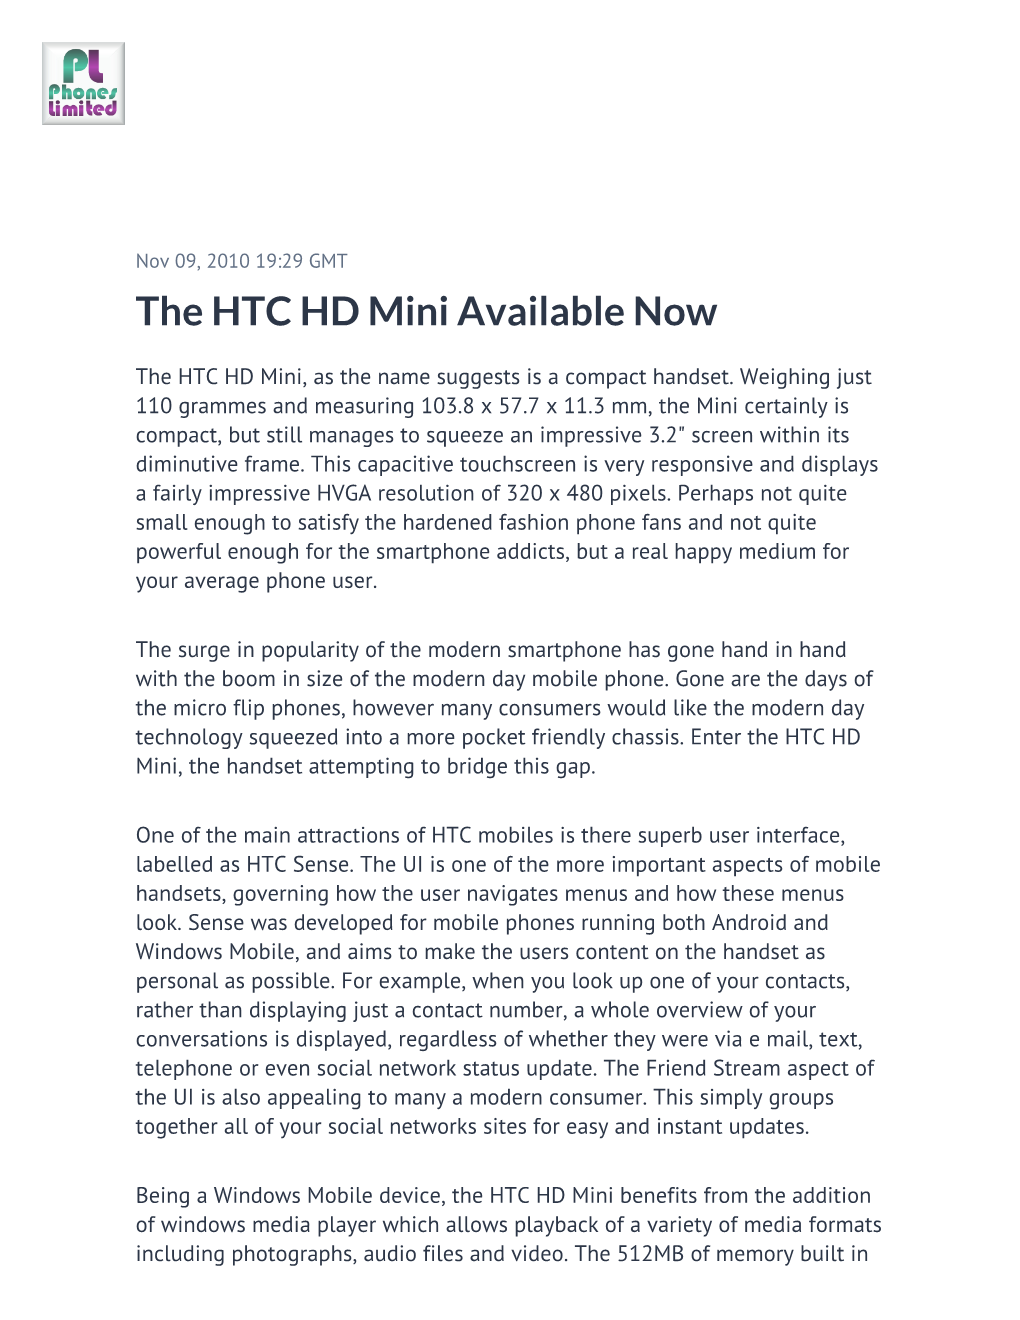 The HTC HD Mini Available Now